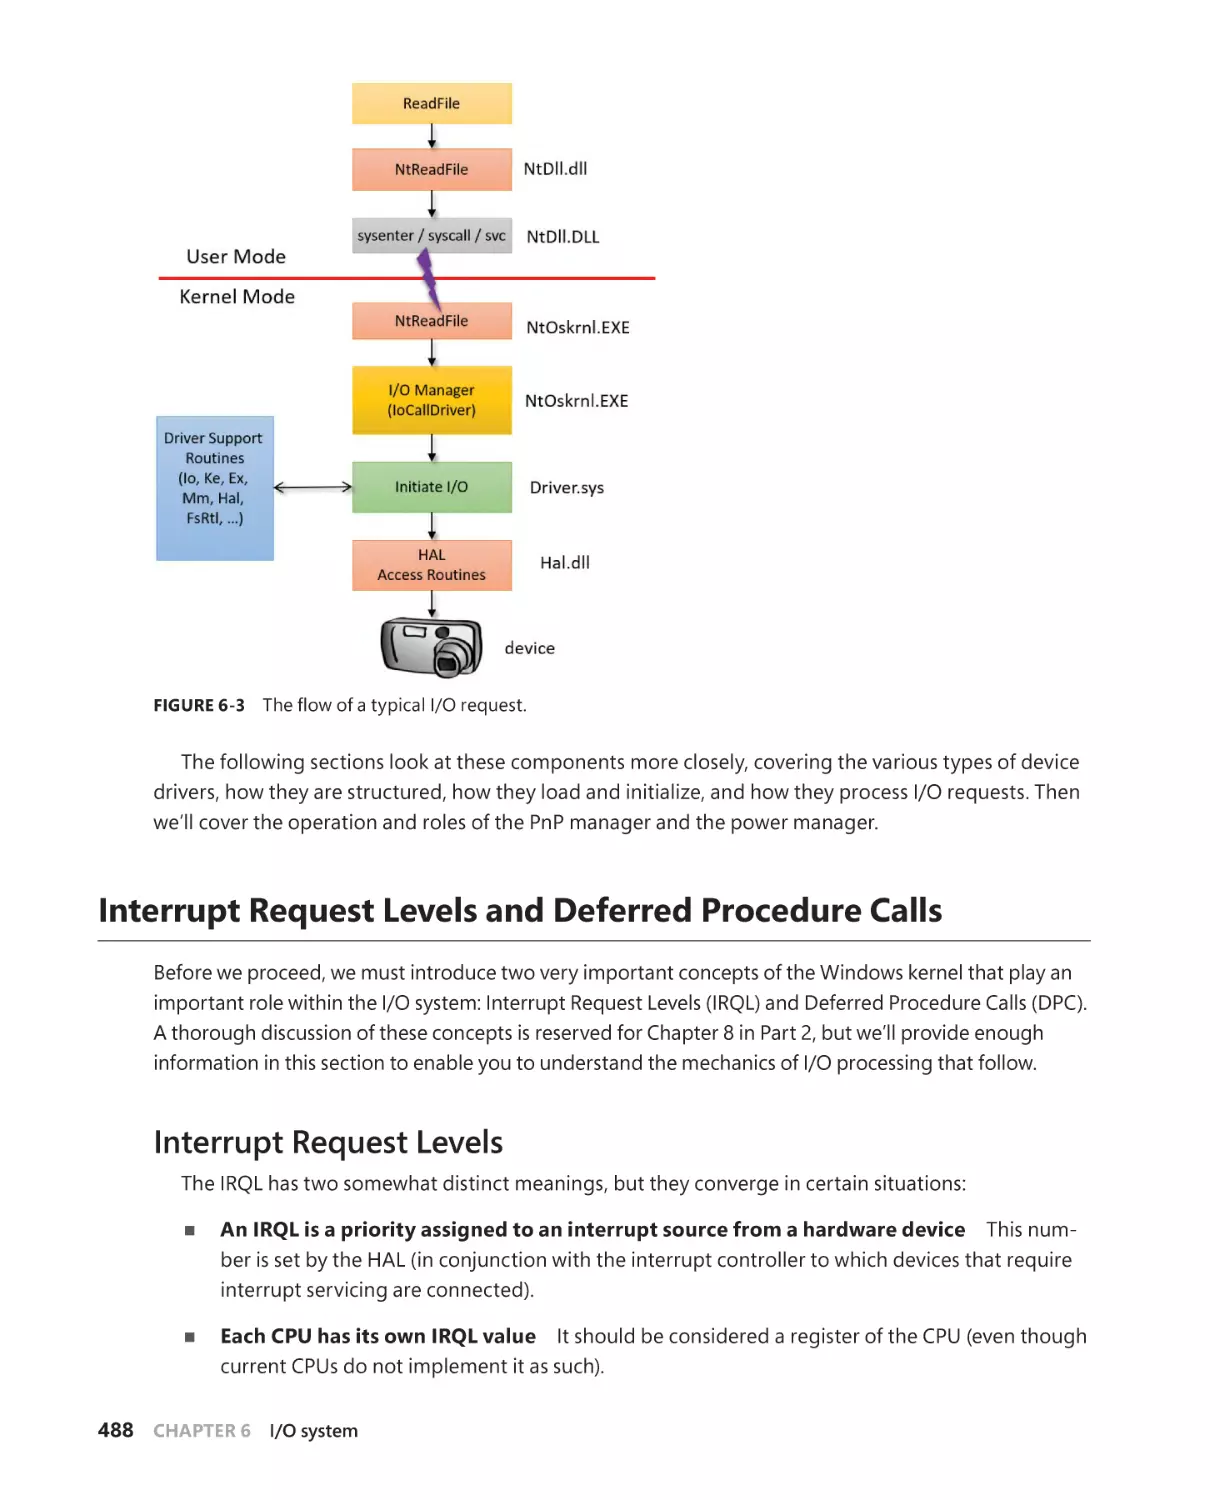 Interrupt Request Levels and Deferred Procedure Calls
Interrupt Request Levels